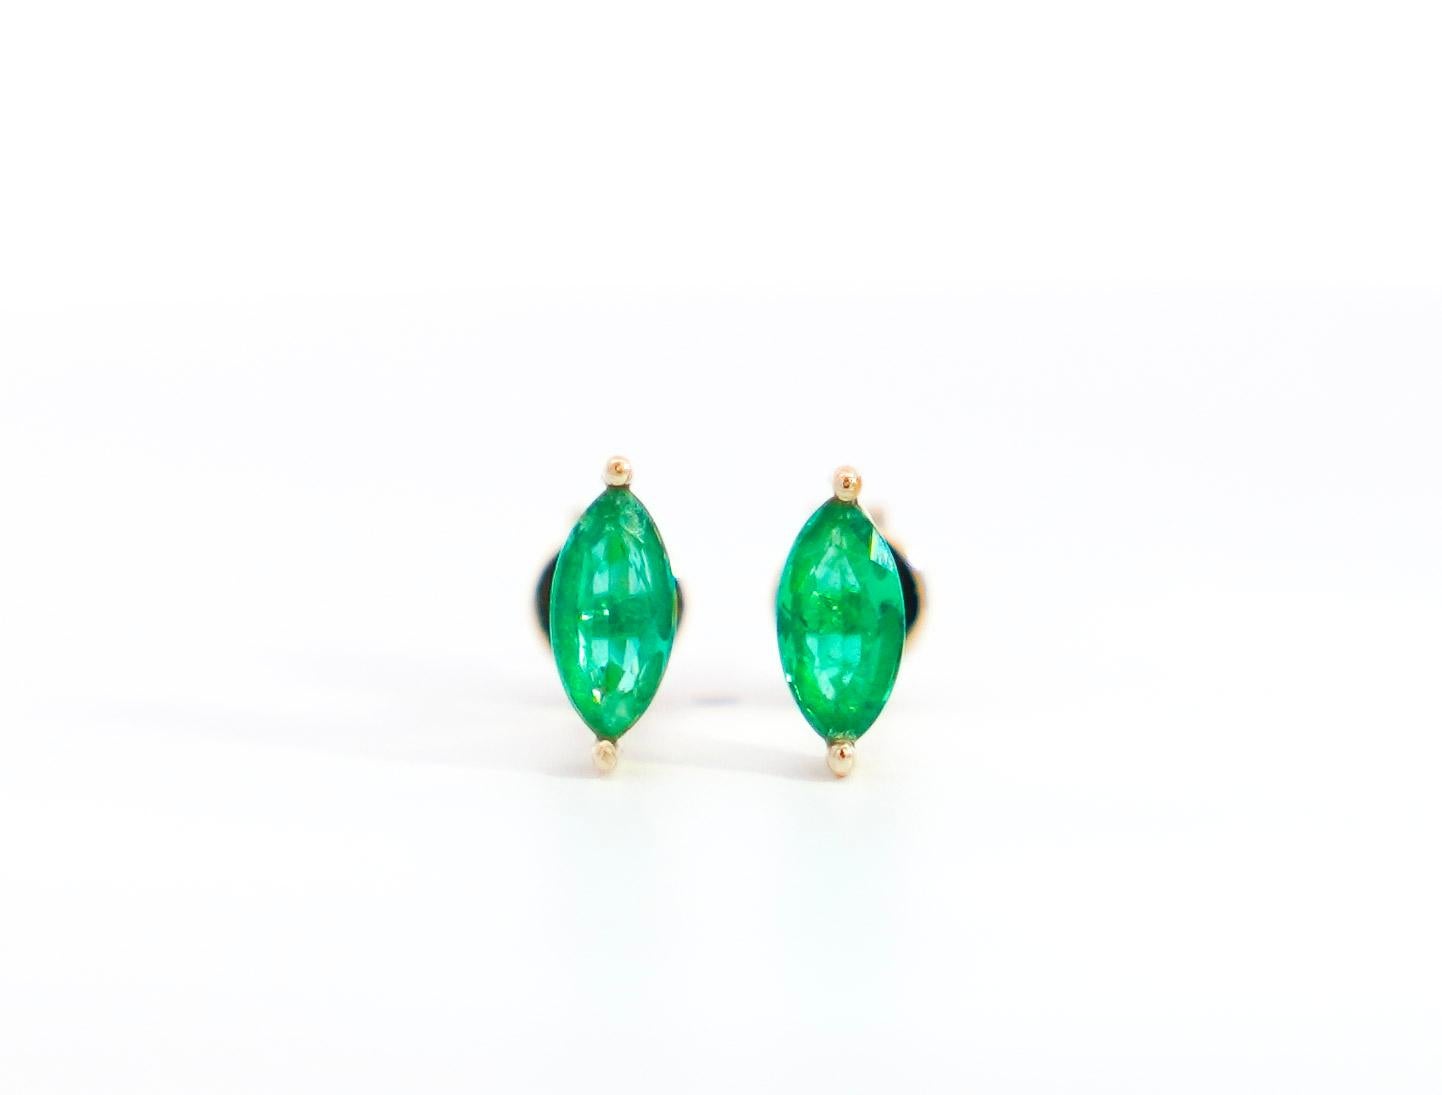 Natural Green Emerald Stud Earring, Set in 14K Yellow Gold. 

Push back stud earrings with a prong set of vivid green marquise-cut natural emeralds. With push back closure and a minimalist low basket setting, these are the ideal stud earrings for